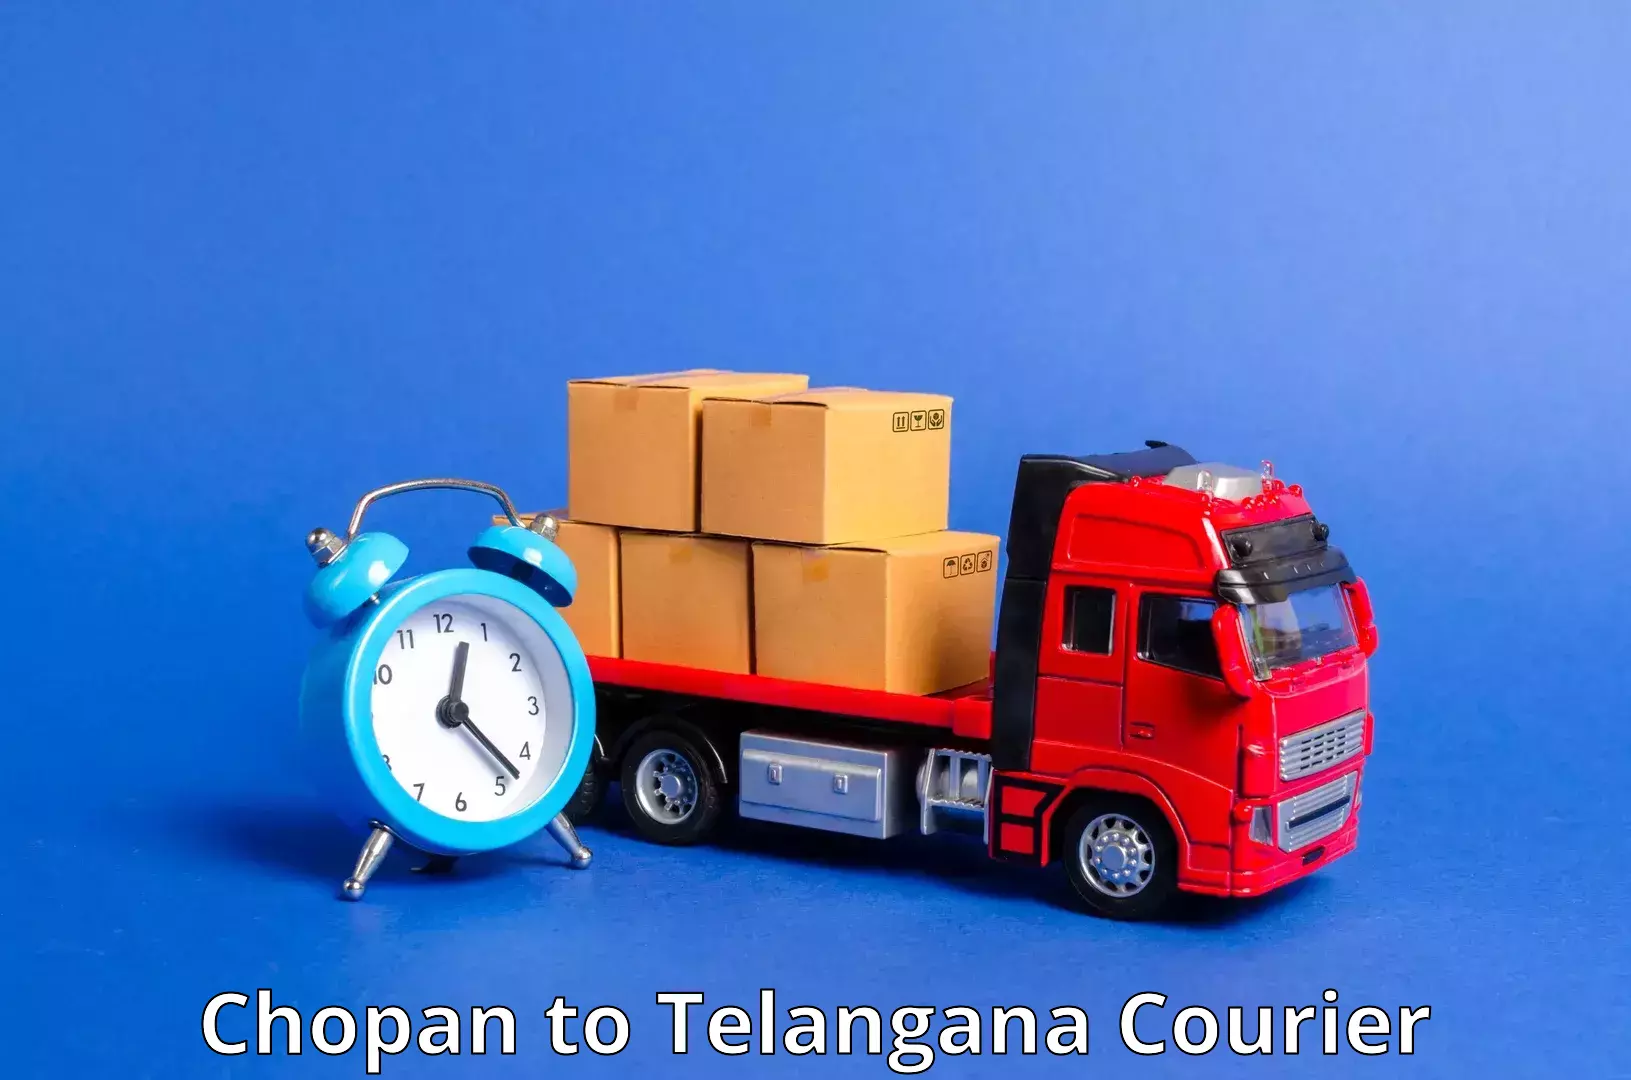 State-of-the-art courier technology Chopan to Netrang